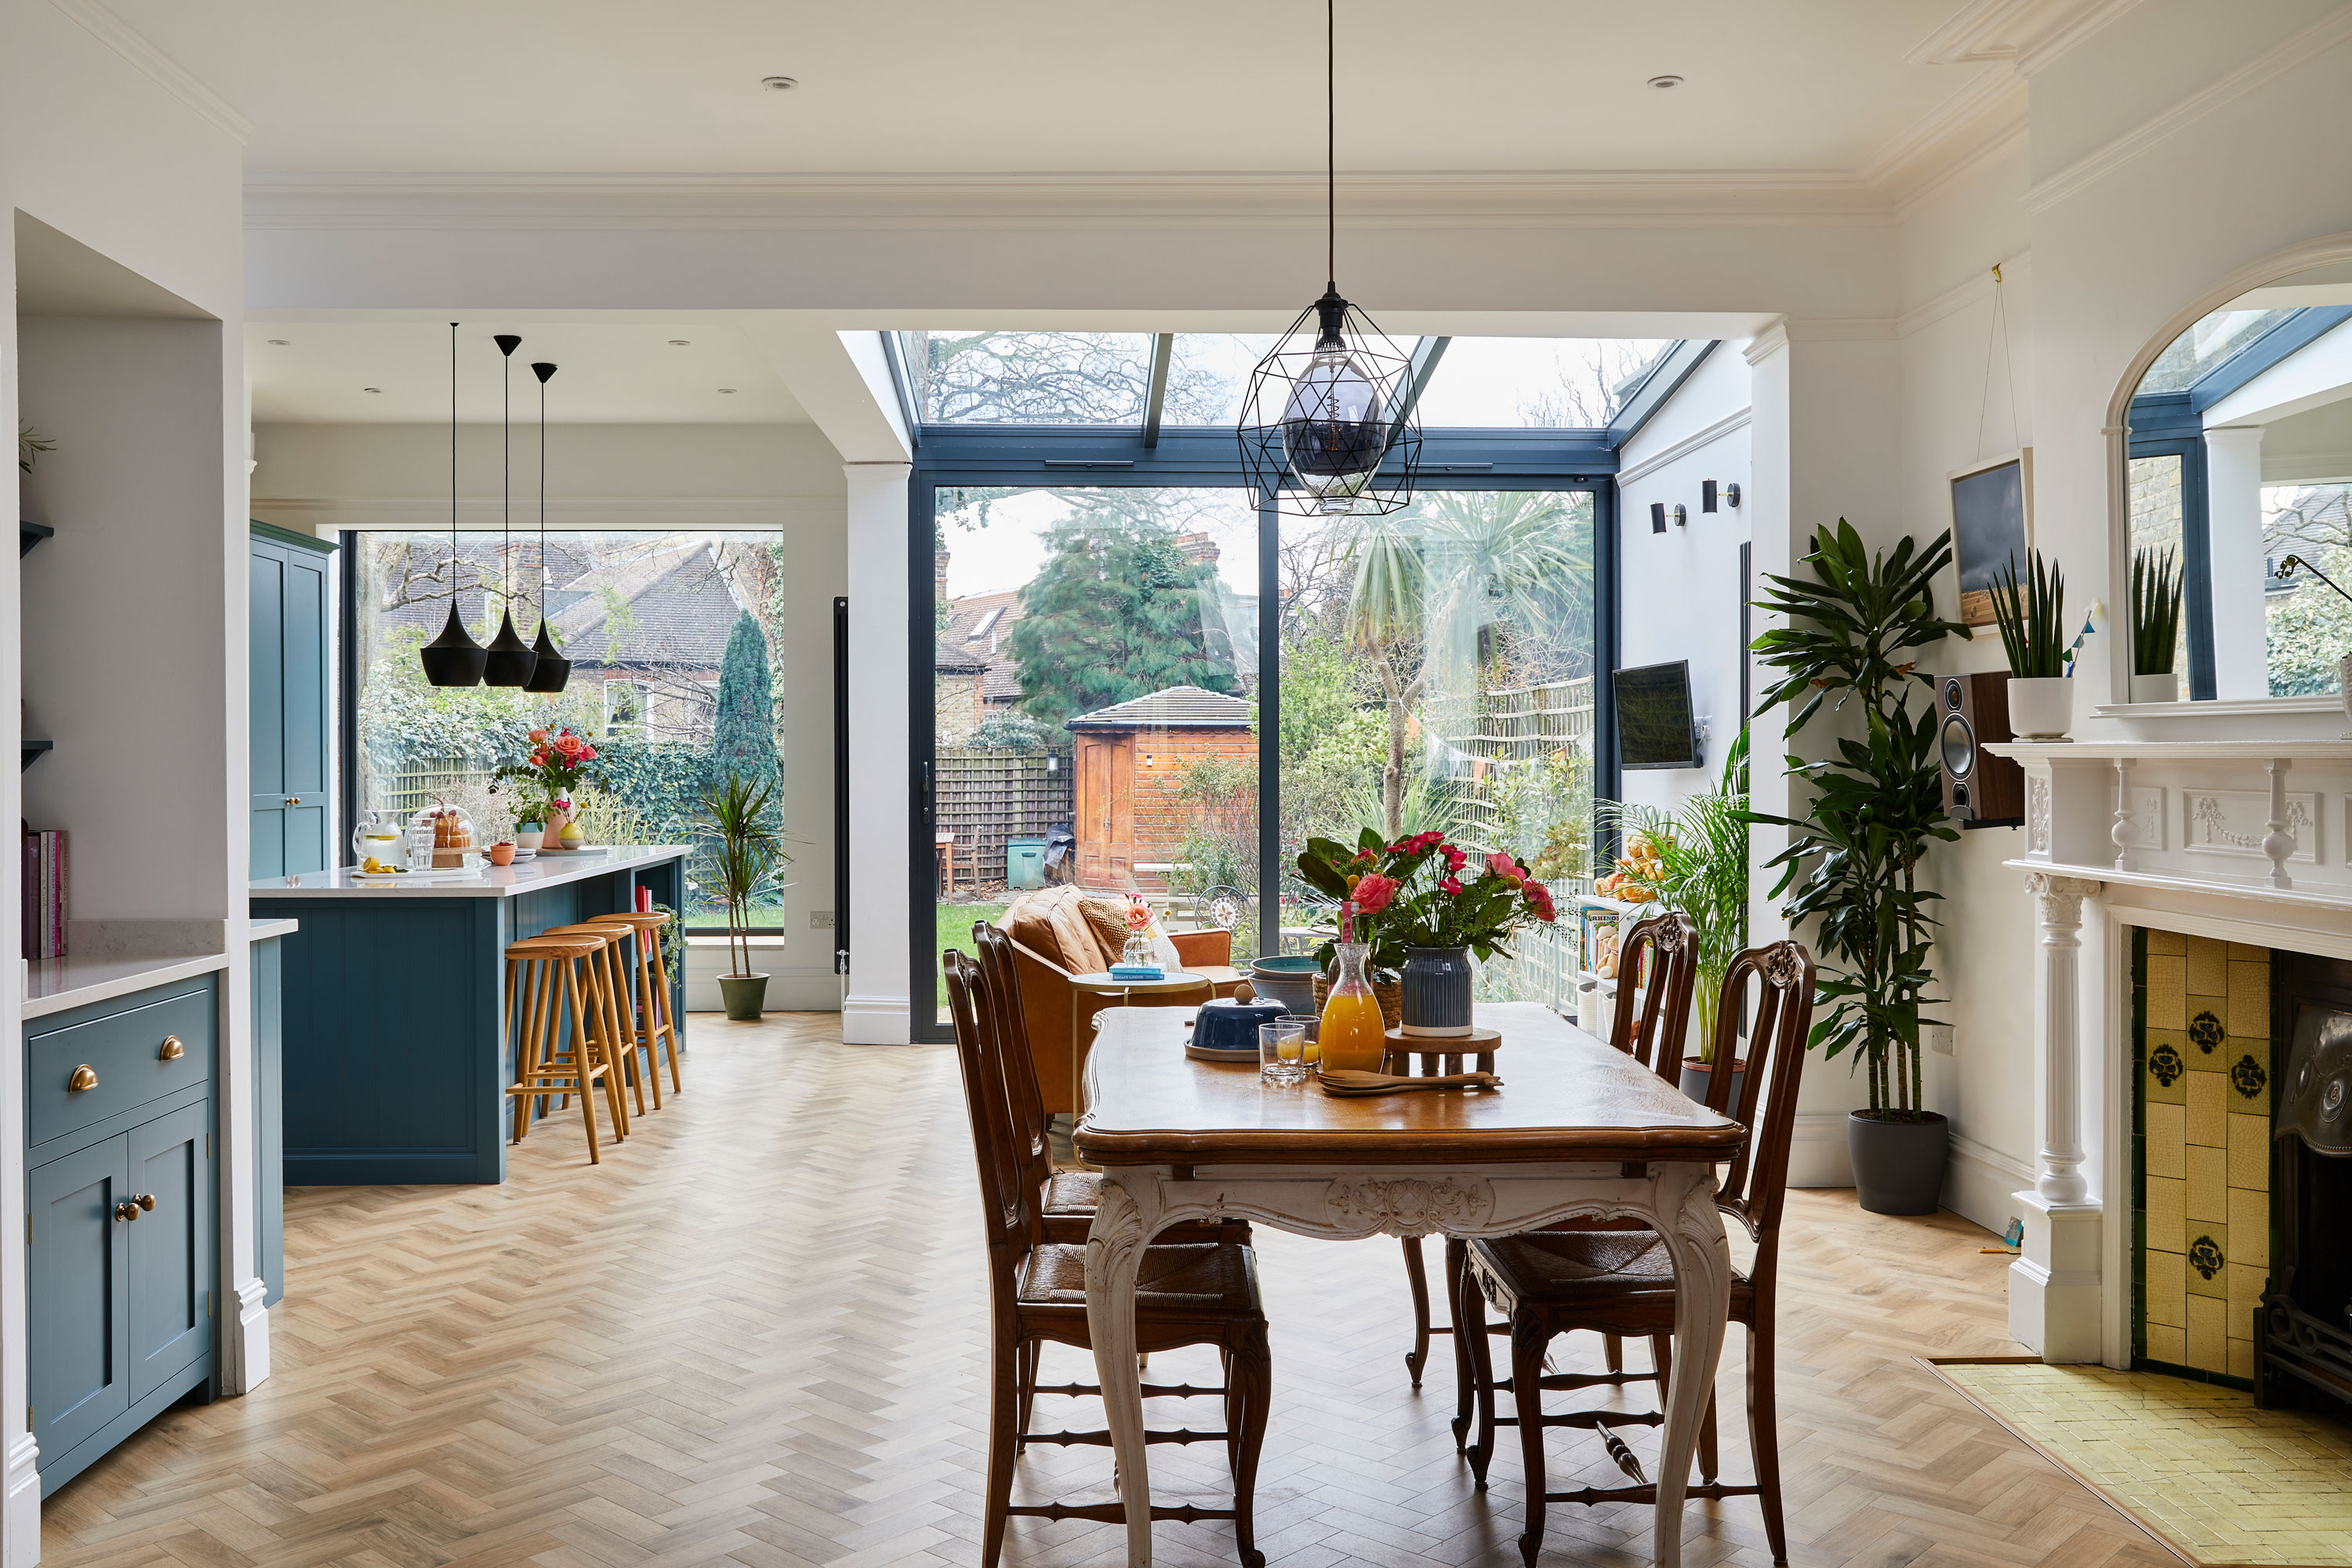 Andrew and Katie White's conservatory-style kitchen extension is a bright, sympathetic addition to their Edwardian home in Lewisham